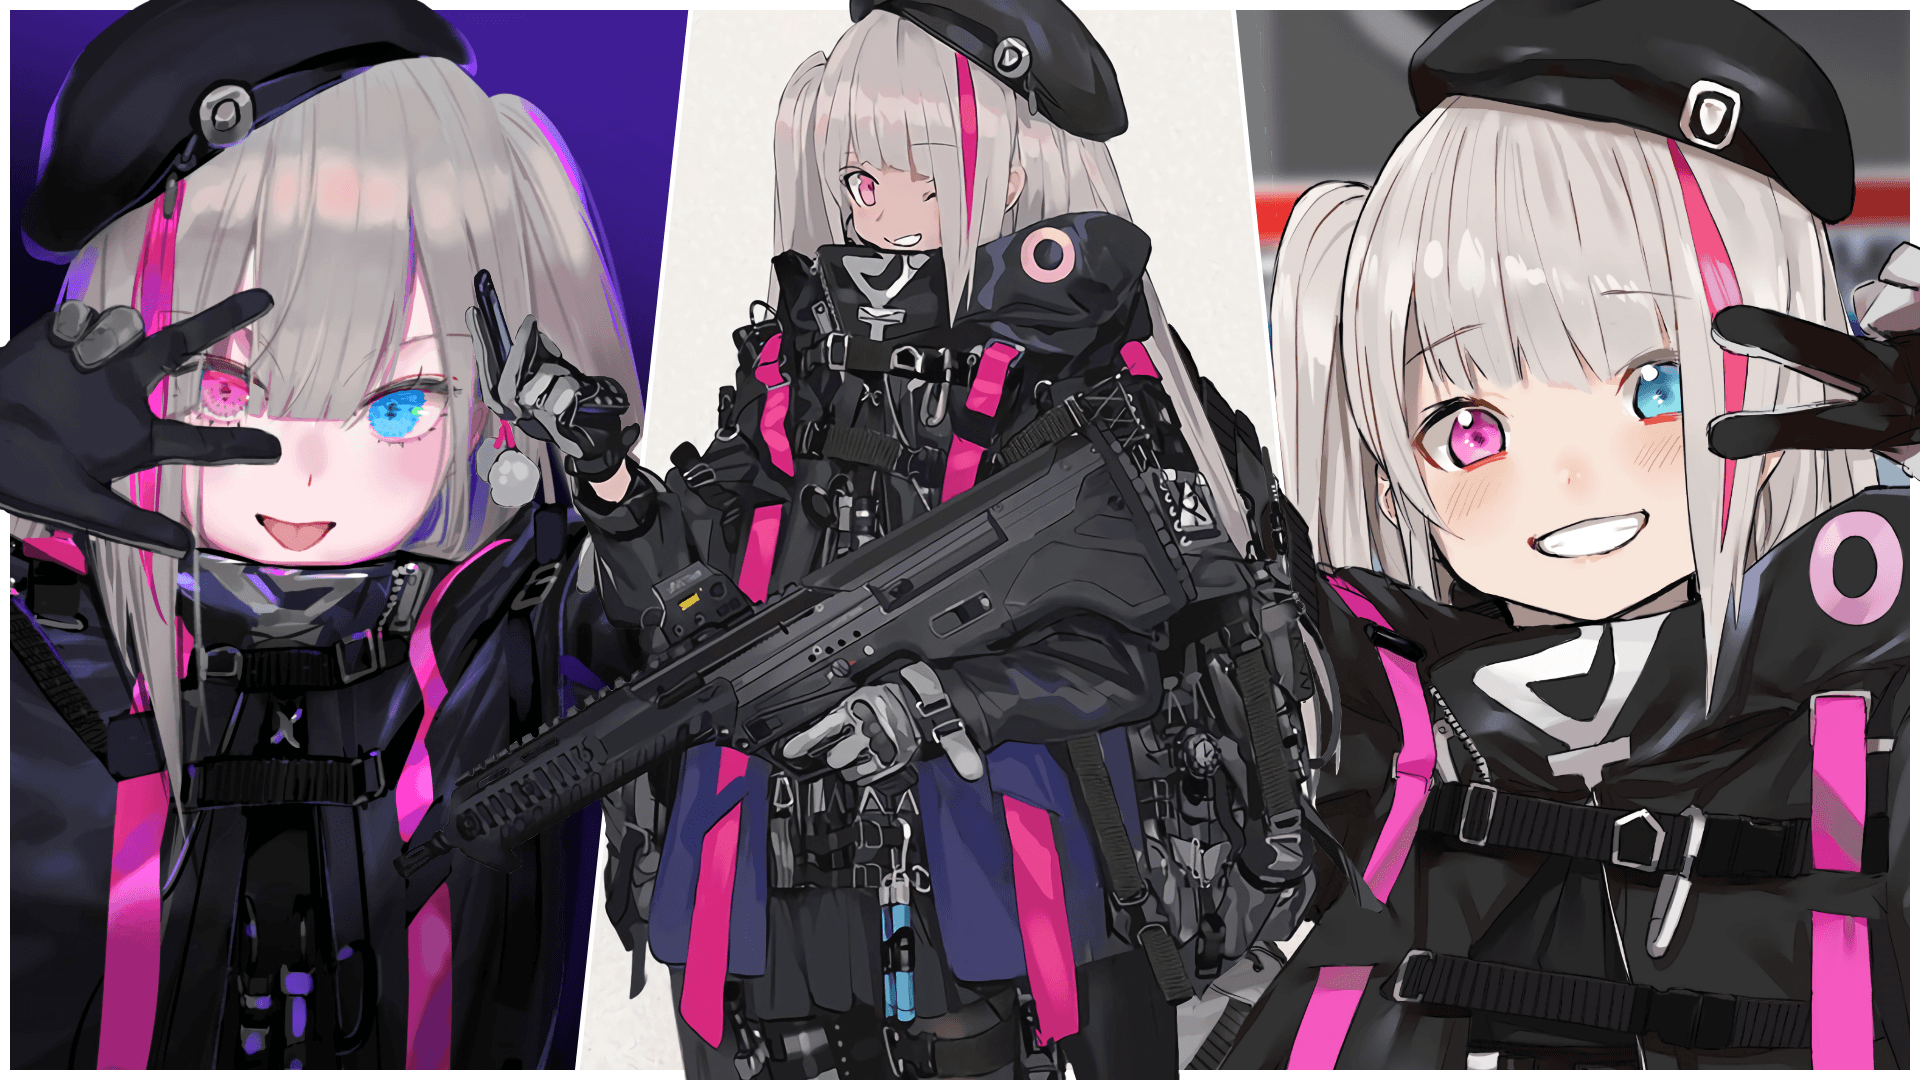 A wallpaper I threw together for MDR from Girls' Frontline